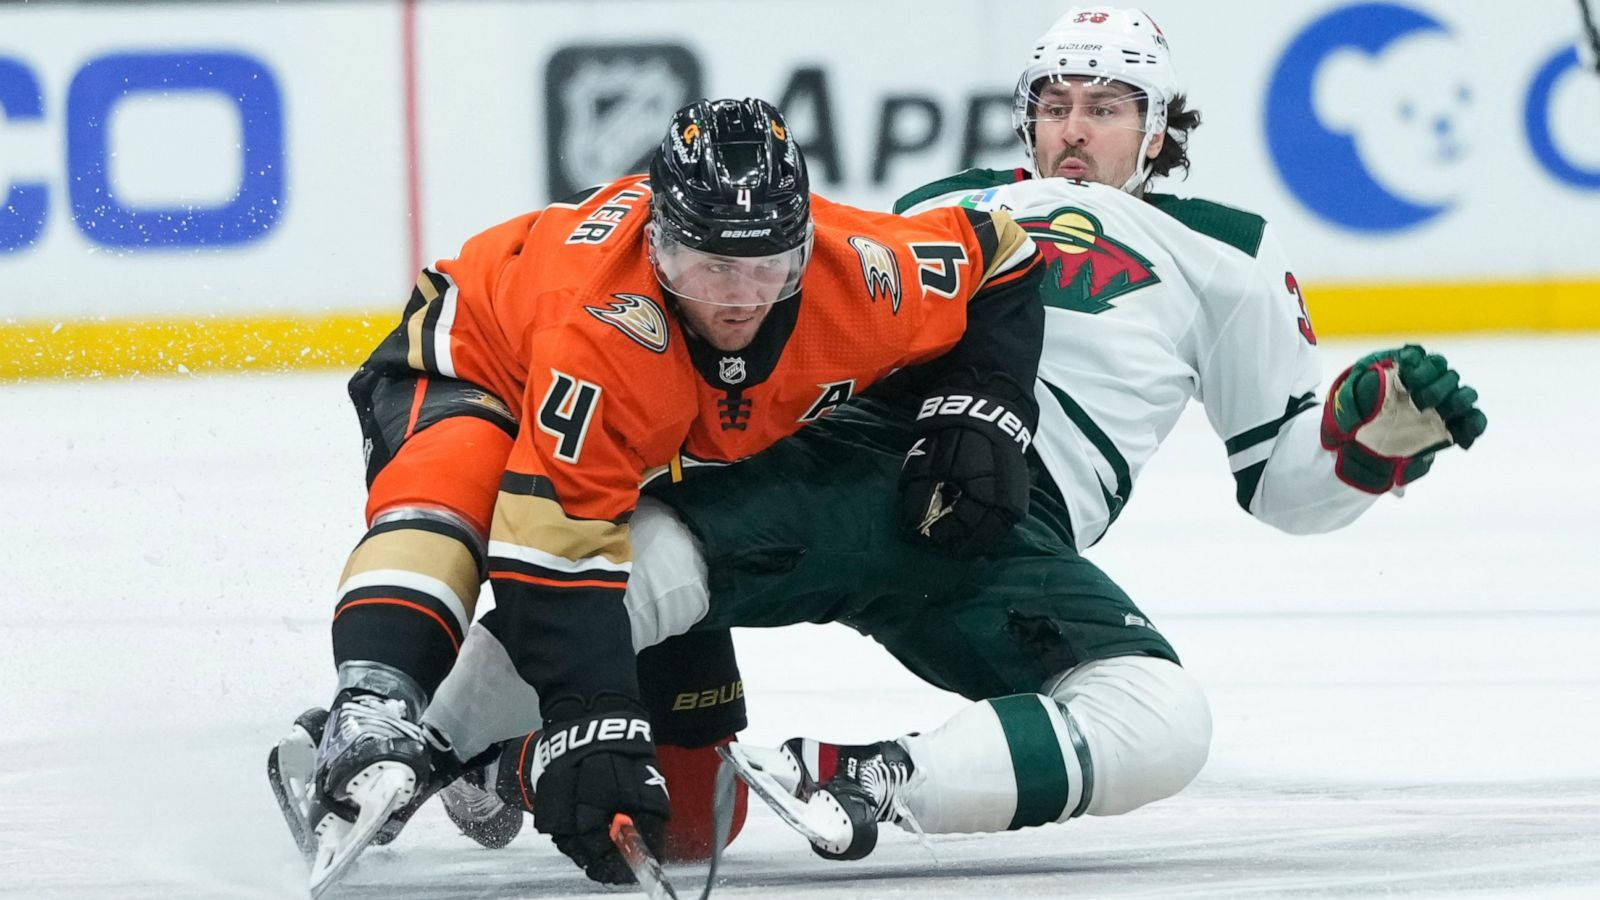 Cam Fowler in action against Mats Zuccarello of Minnesota Wild Wallpaper